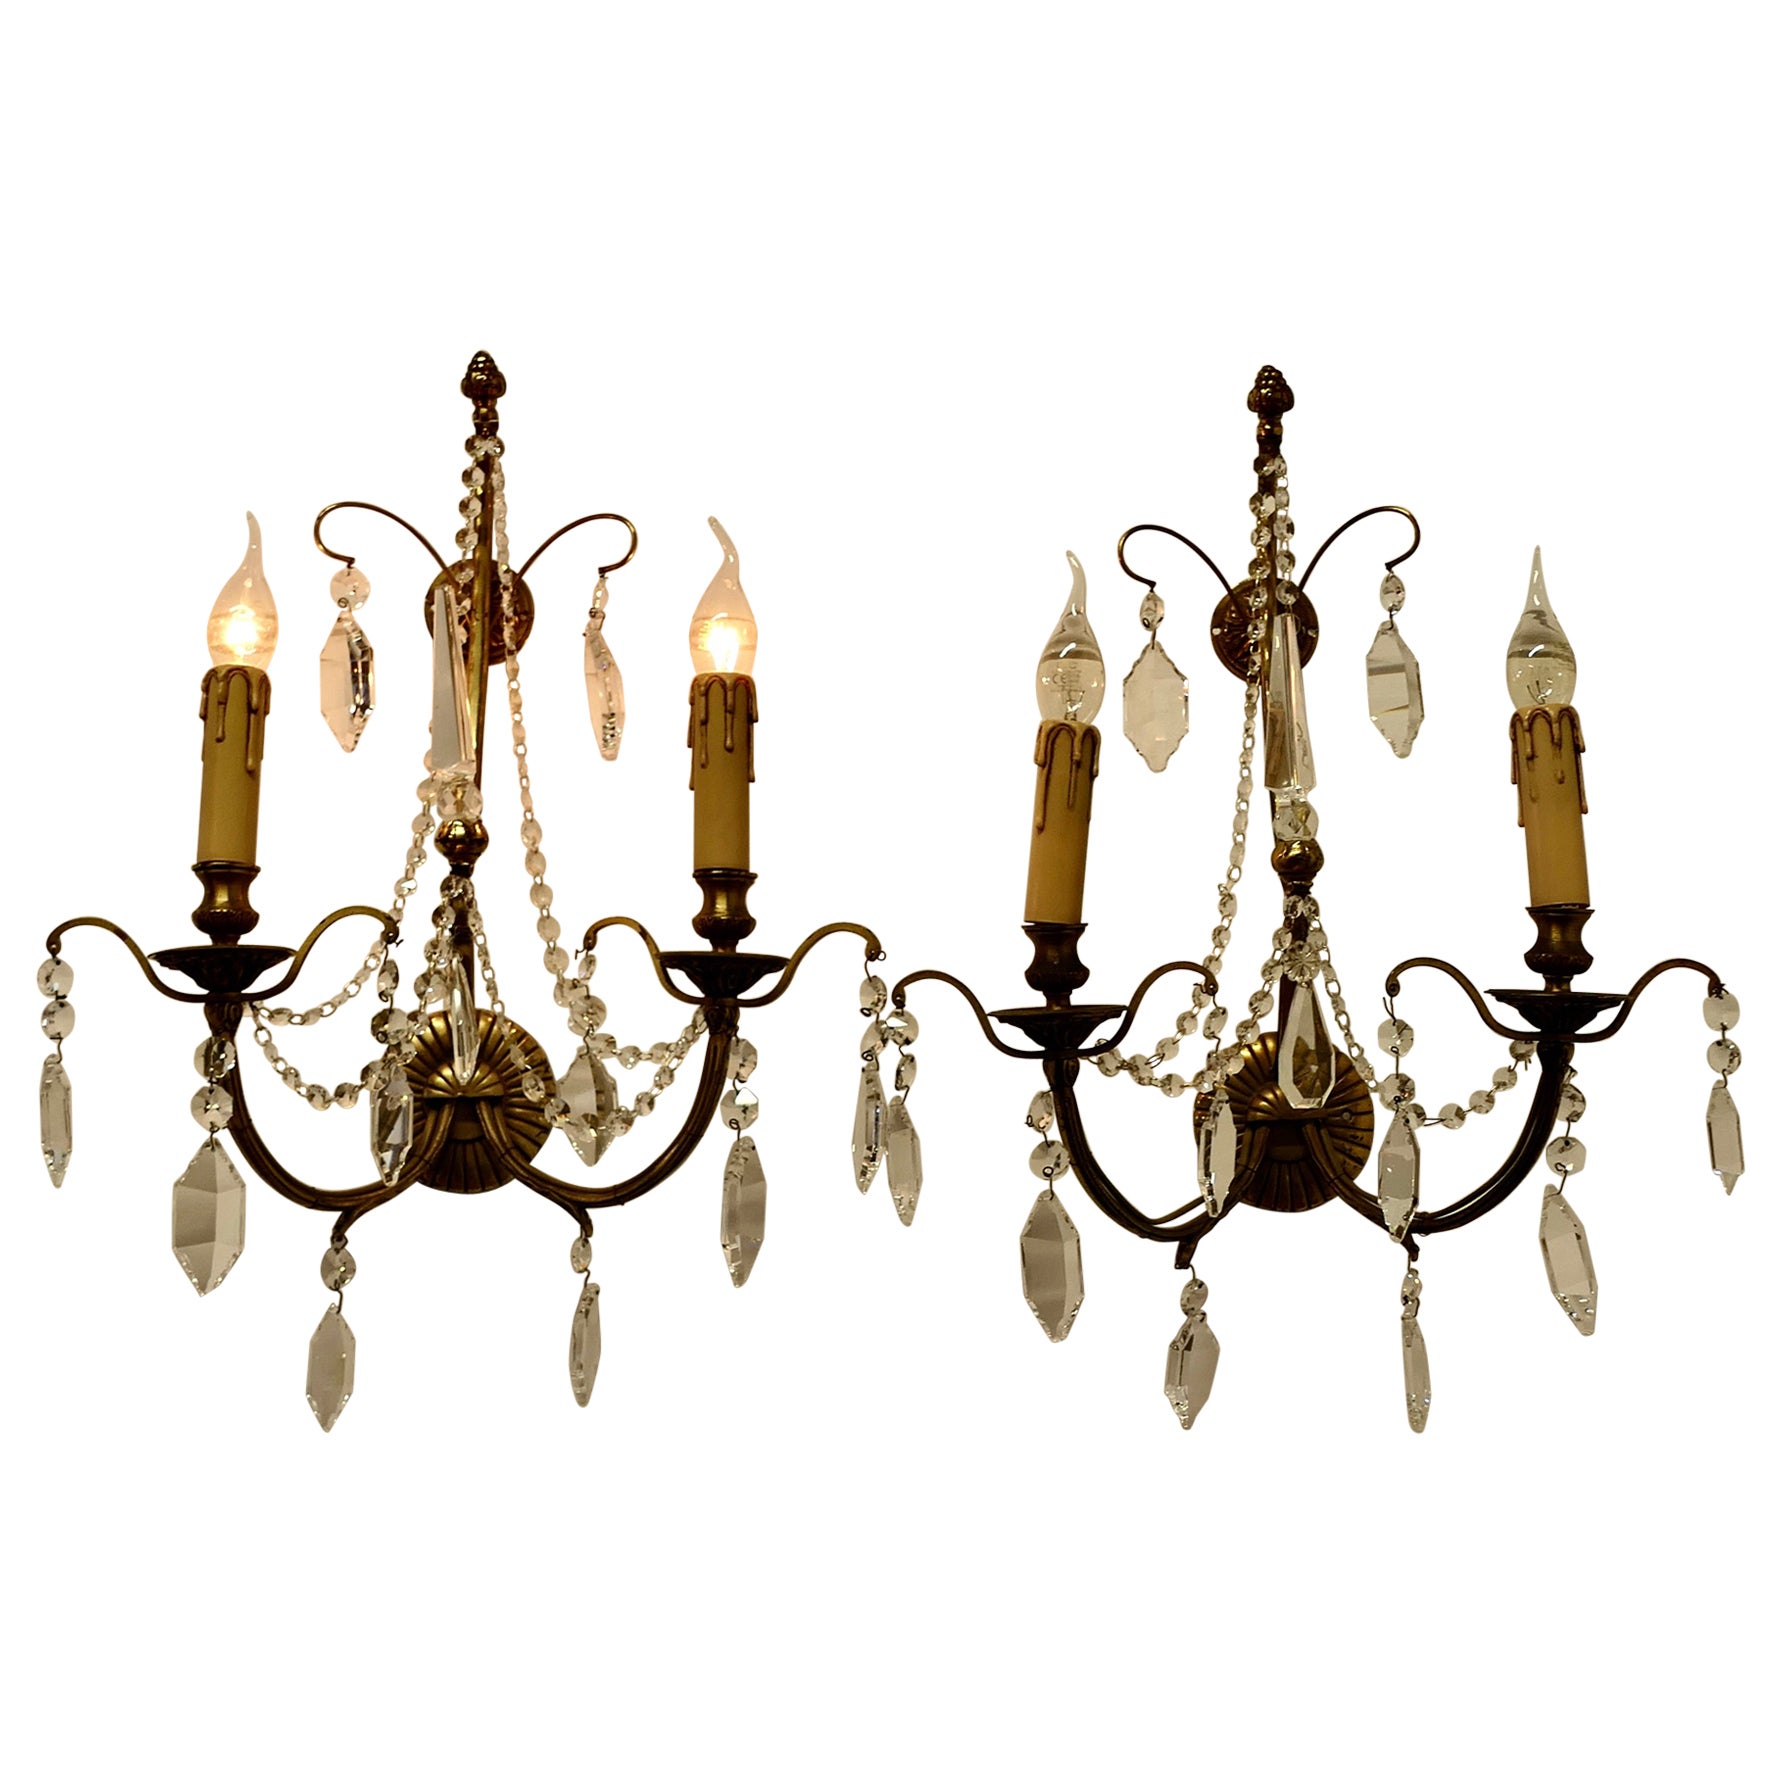 A Magnificent Pair of French Wall Chandeliers    For Sale